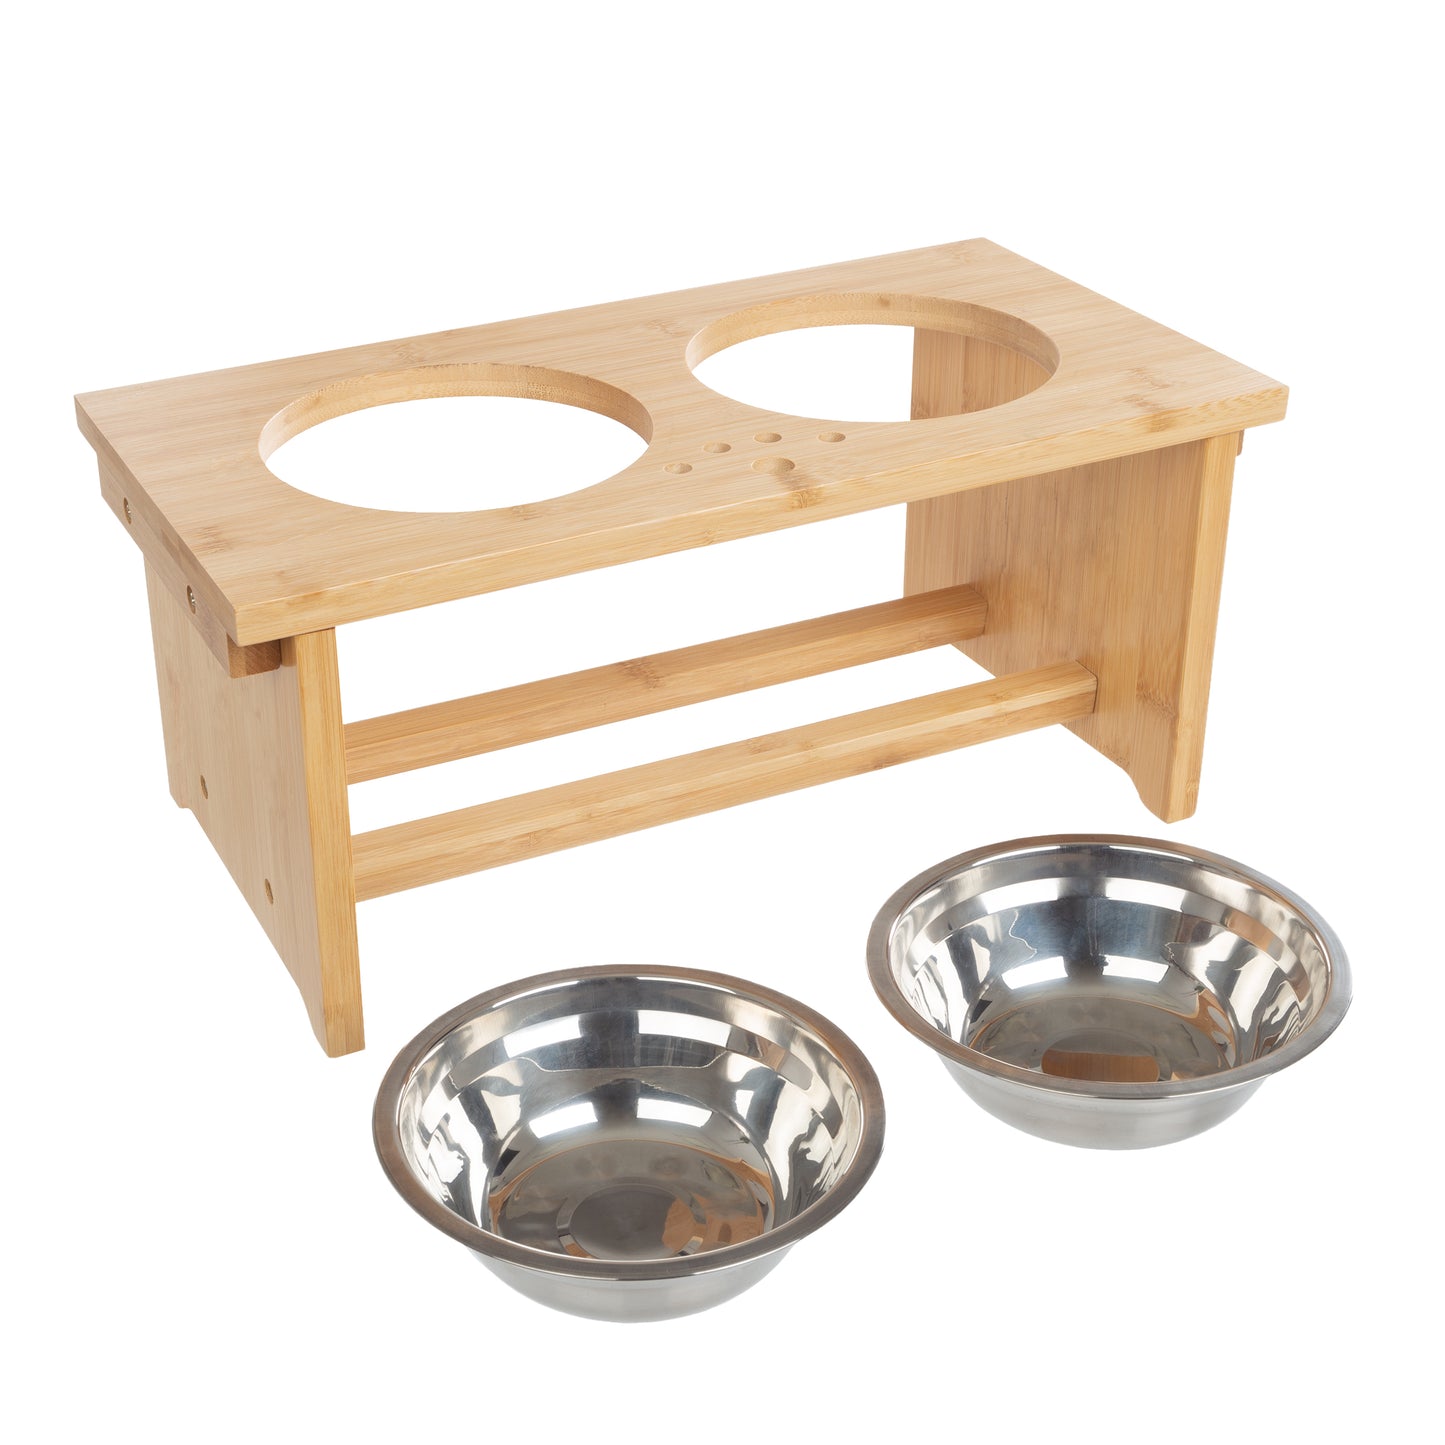 ZPirates Dog Water Bowl Dispenser Stand - Adjustable Width, Holds Pet Food and Water Dispensers - Bamboo Stand Only